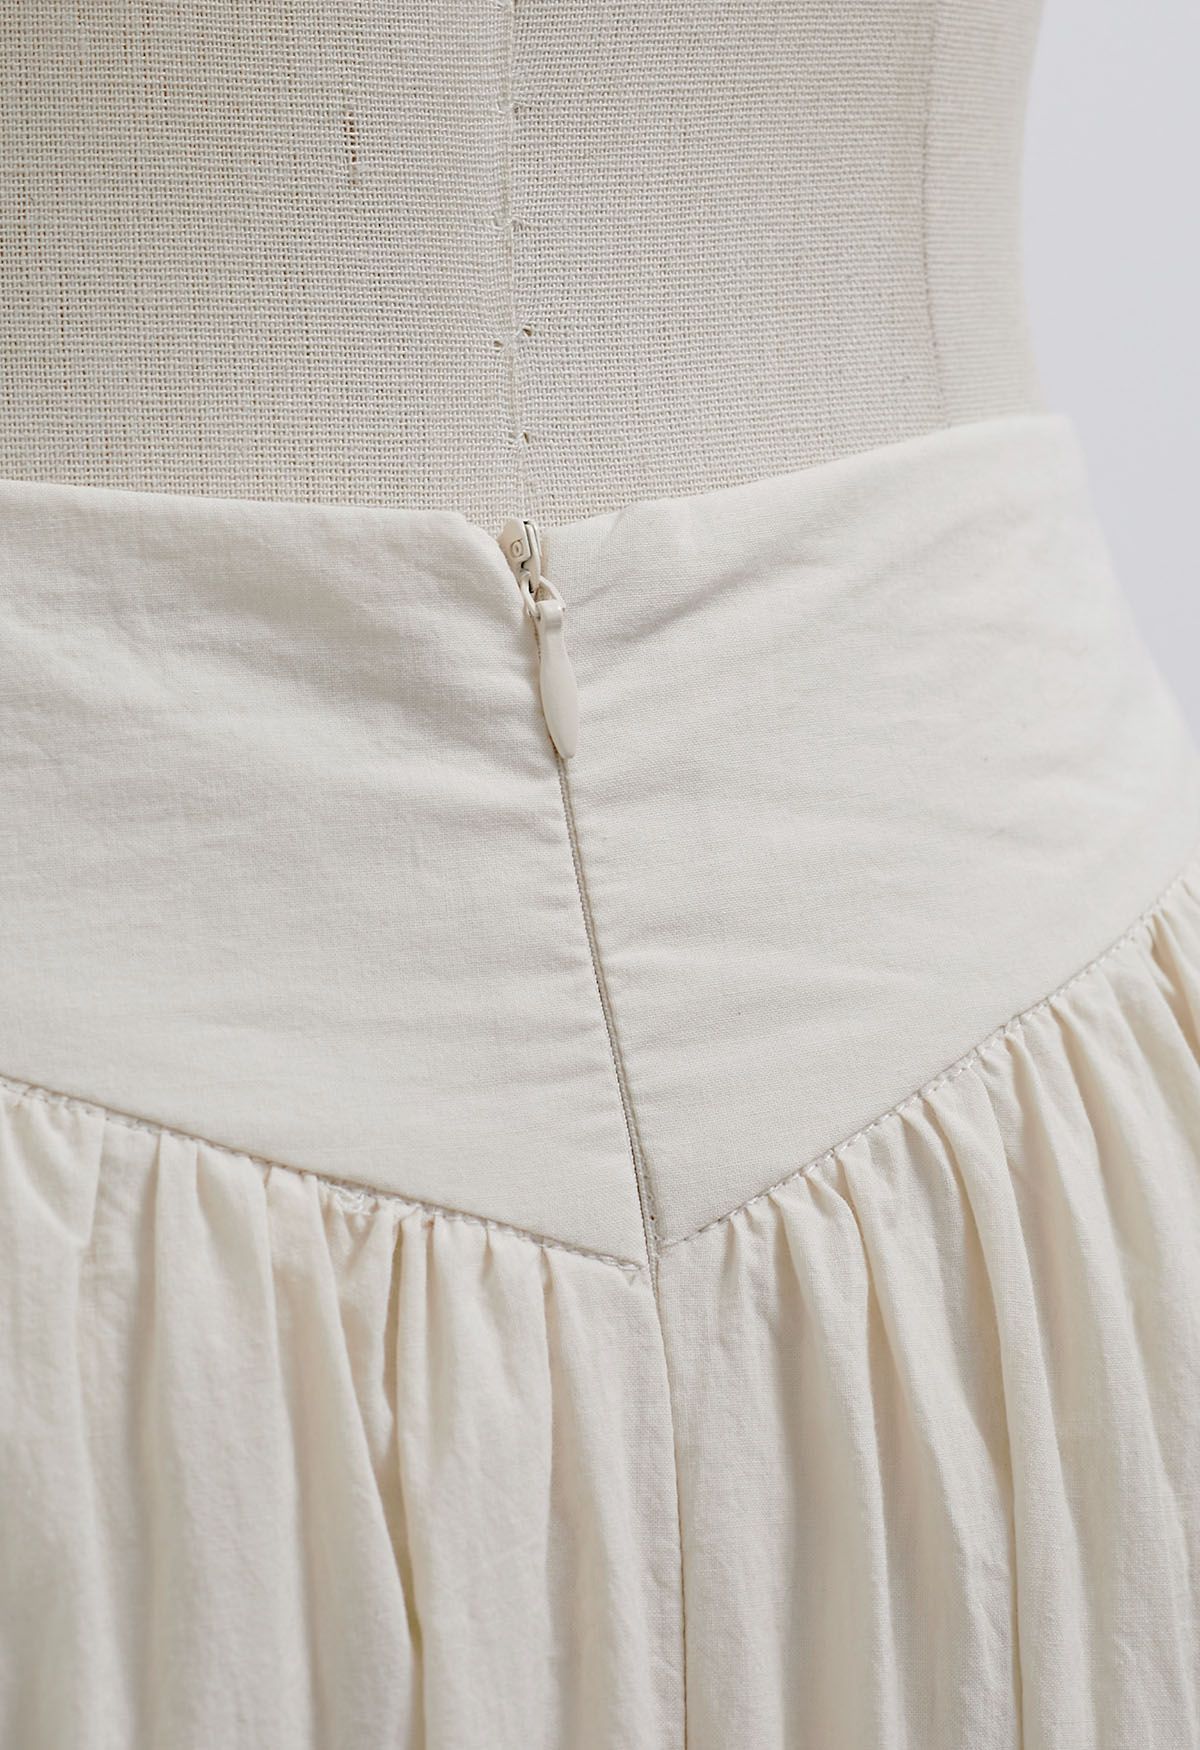 Simple Elegance Texture A-Line Skirt in Ivory